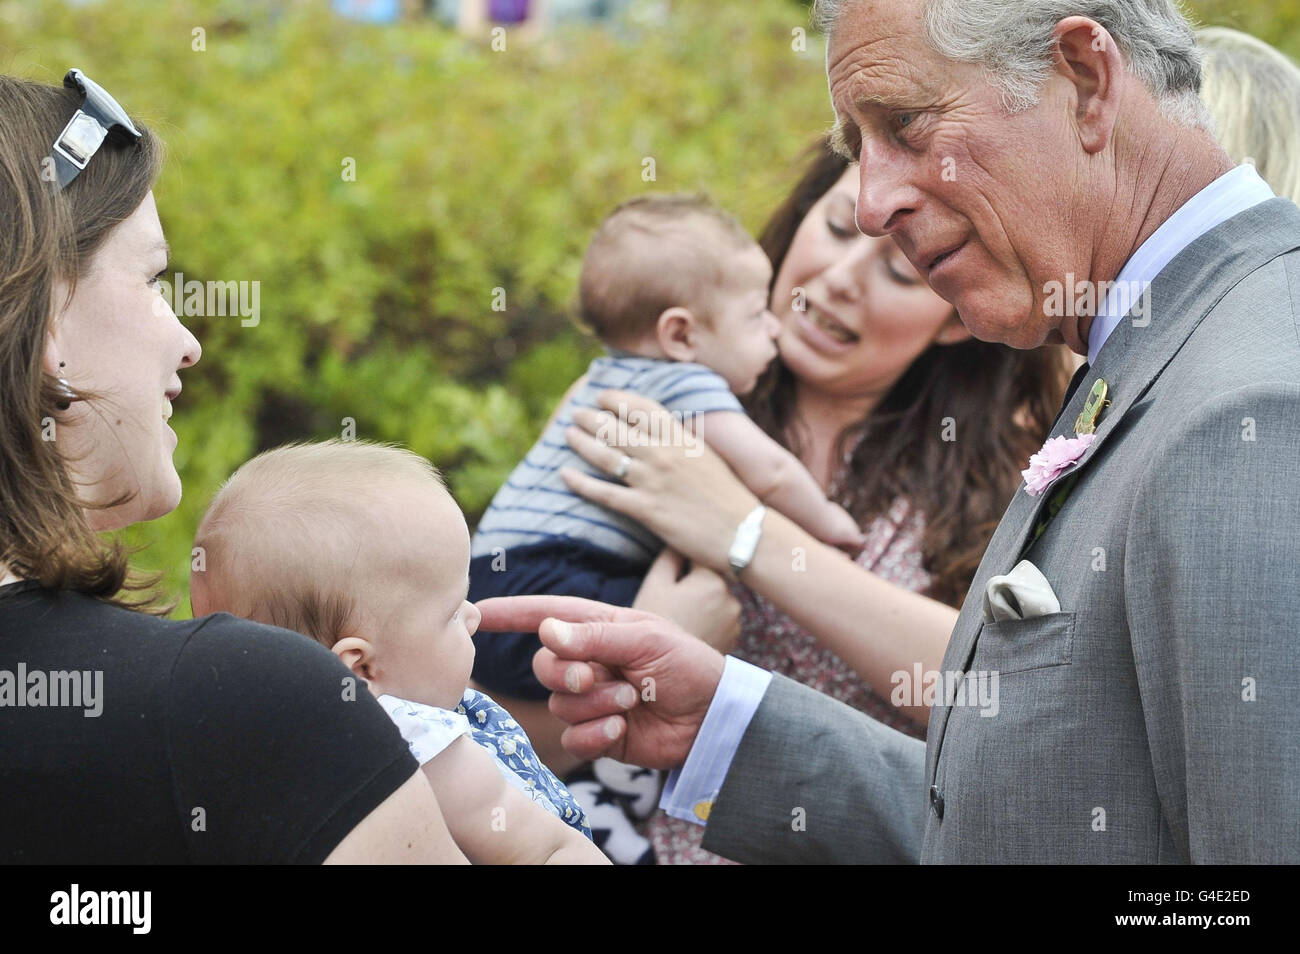 Britain's Prince Charles talks to Sarah Lush and her baby Anya, aged four months, from Cullompton in Devon during his visit to the Culm Valley Integrated Centre for Health in Cullompton. Stock Photo